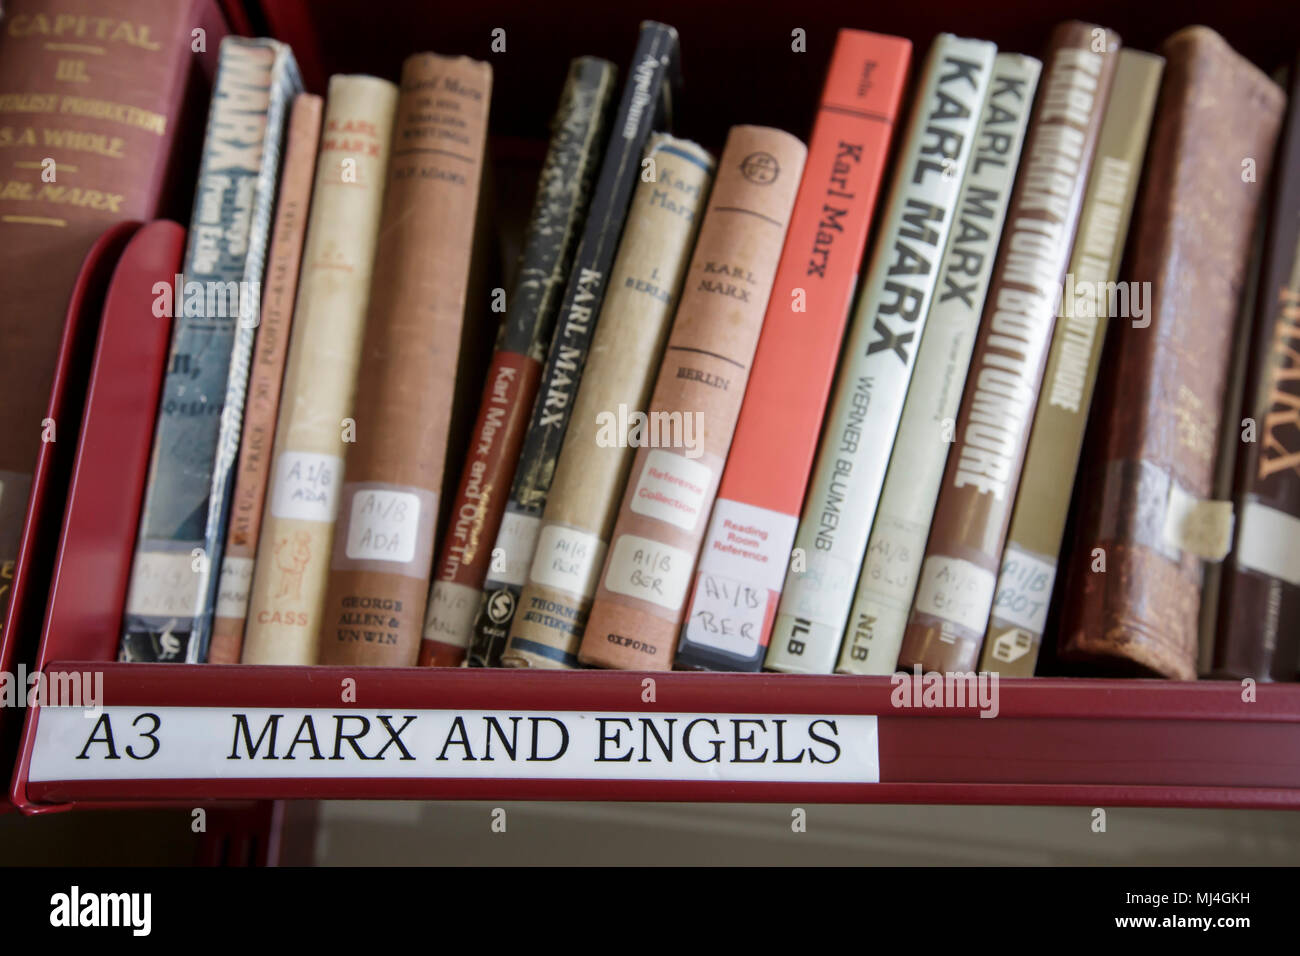 London, UK. 4th May, 2018. Photo taken on May 4, 2018 shows books on the shelf in the reading room of the Marx Memorial Library and Workers' School in London, Britain. Established in 1933 on the 50th anniversary of the death of Marx, the Marx Memorial Library and Workers' School has been the intellectual home of generations of scholars interested in studying Marxism, trade unionism, and the working class movement. Credit: Tim Ireland/Xinhua/Alamy Live News Stock Photo